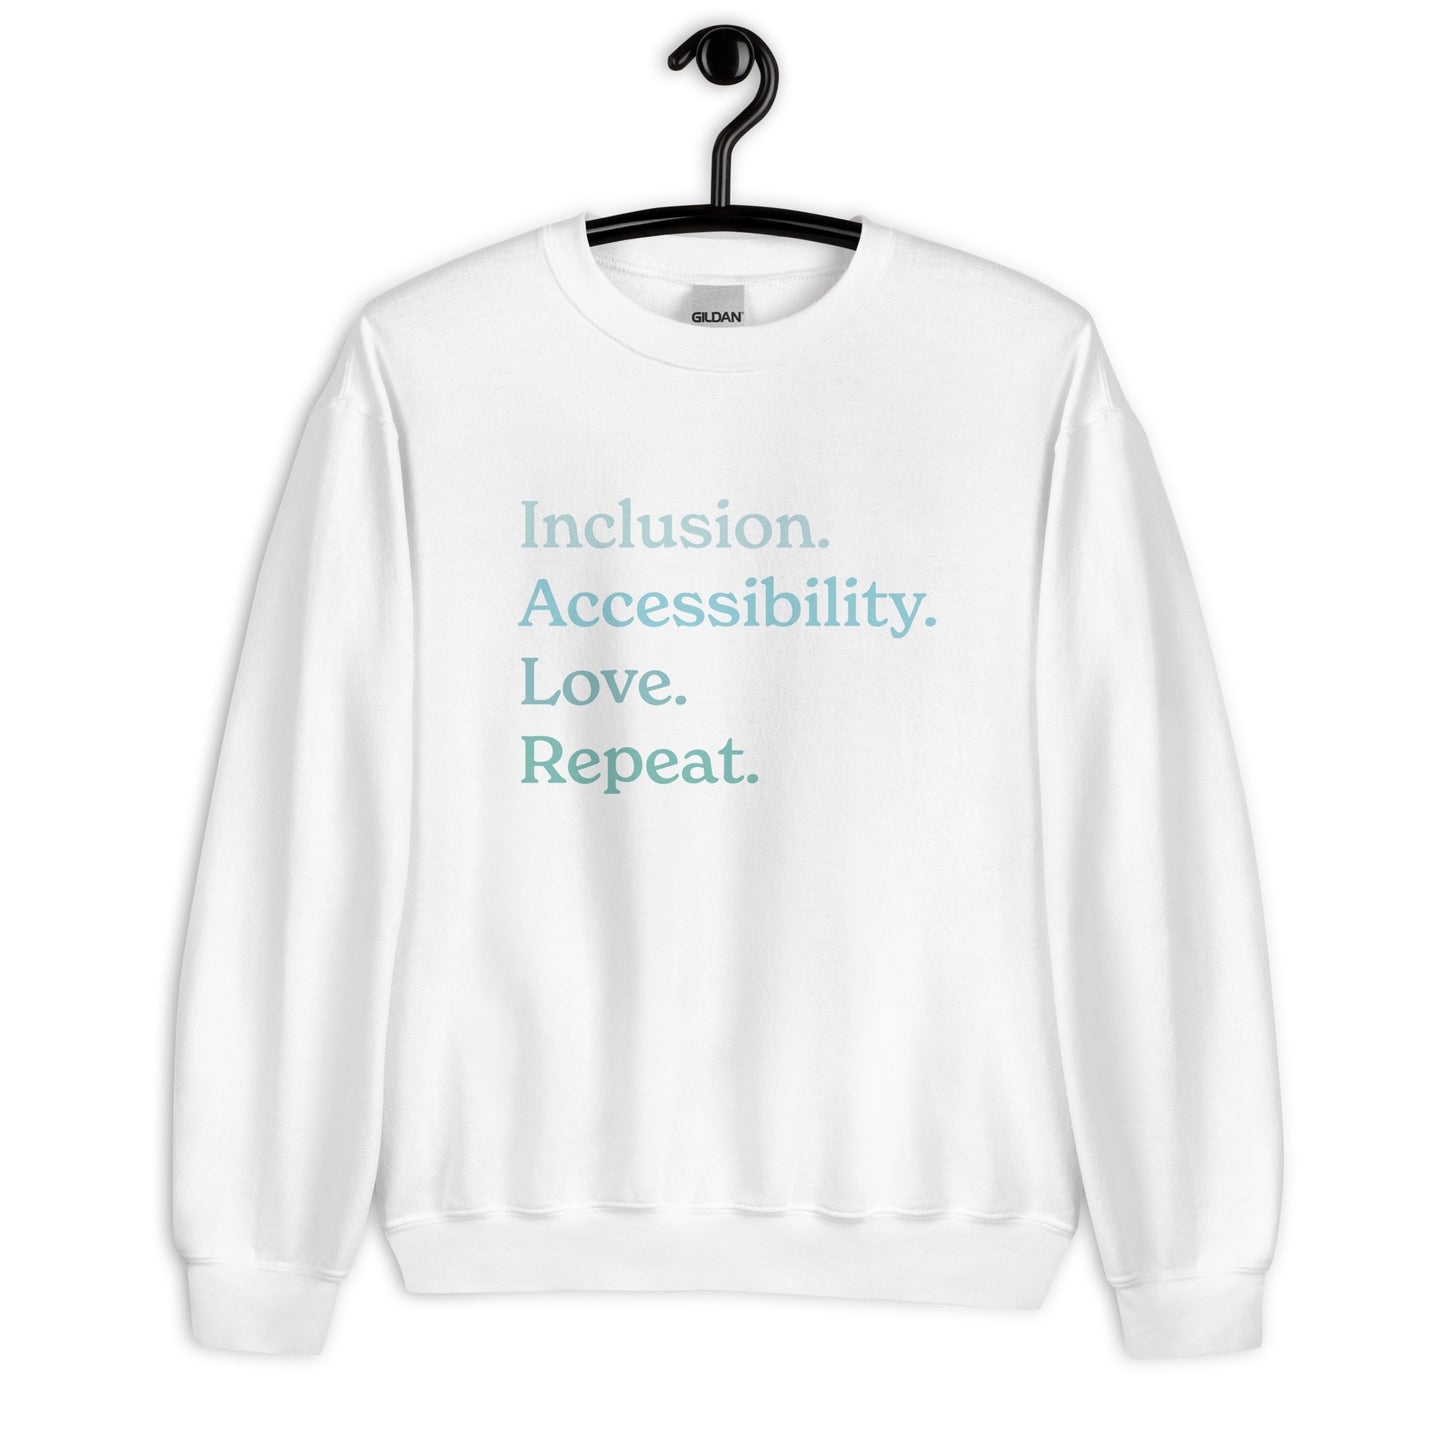 Inclusion. Accessibility. Love. Repeat. — Adult Unisex Sweatshirt